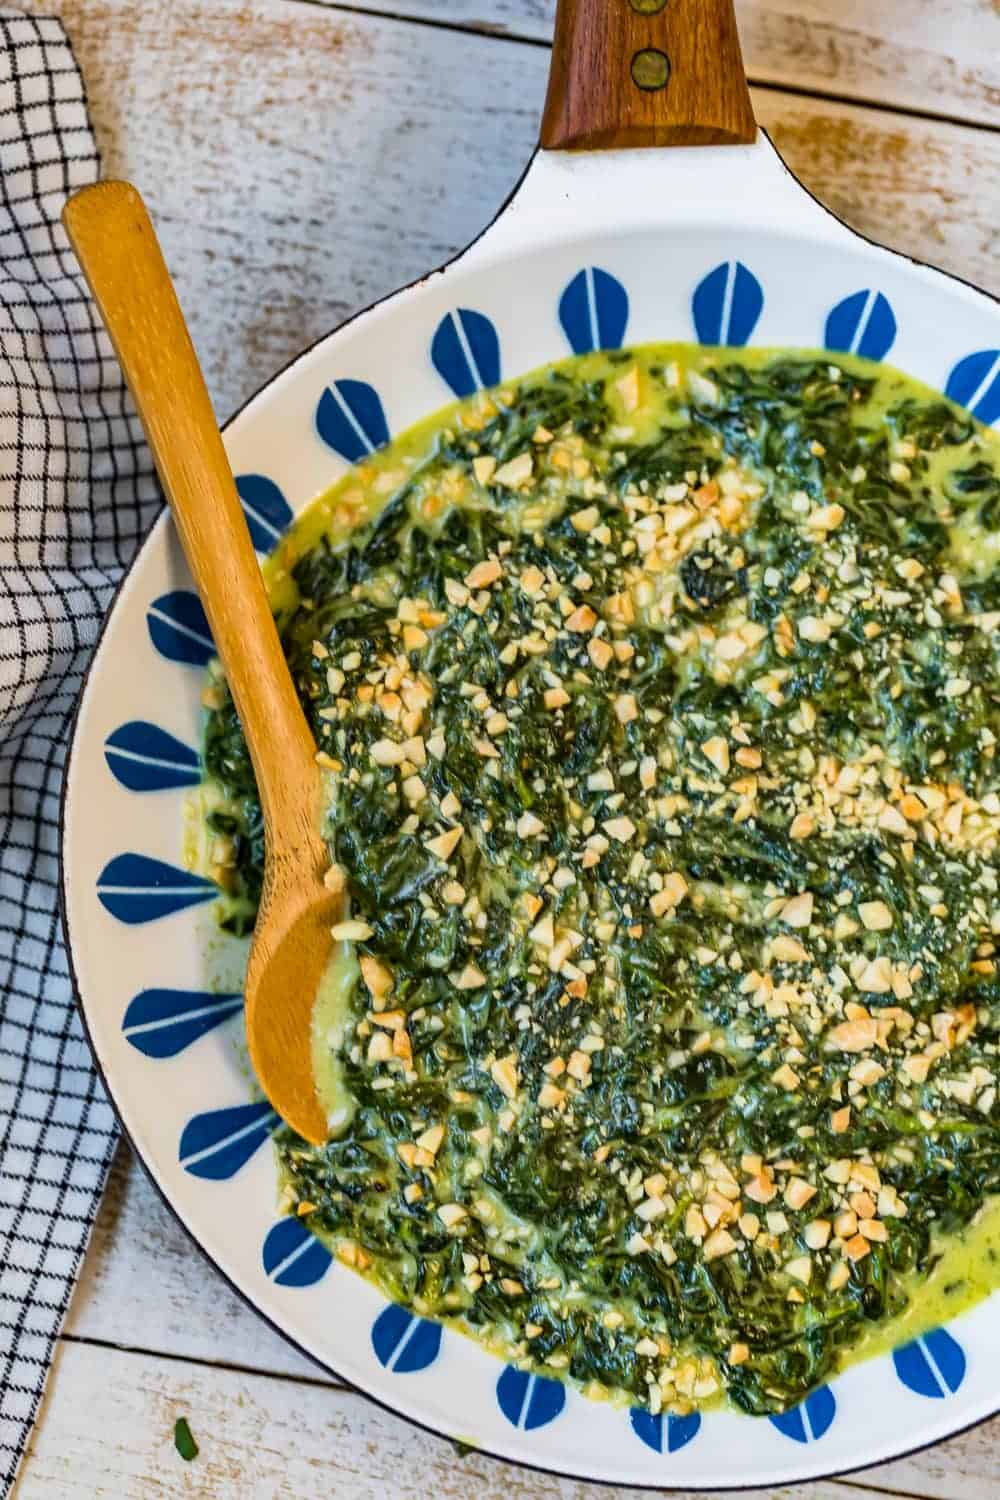 Creamed spinach topped with toasted almonds